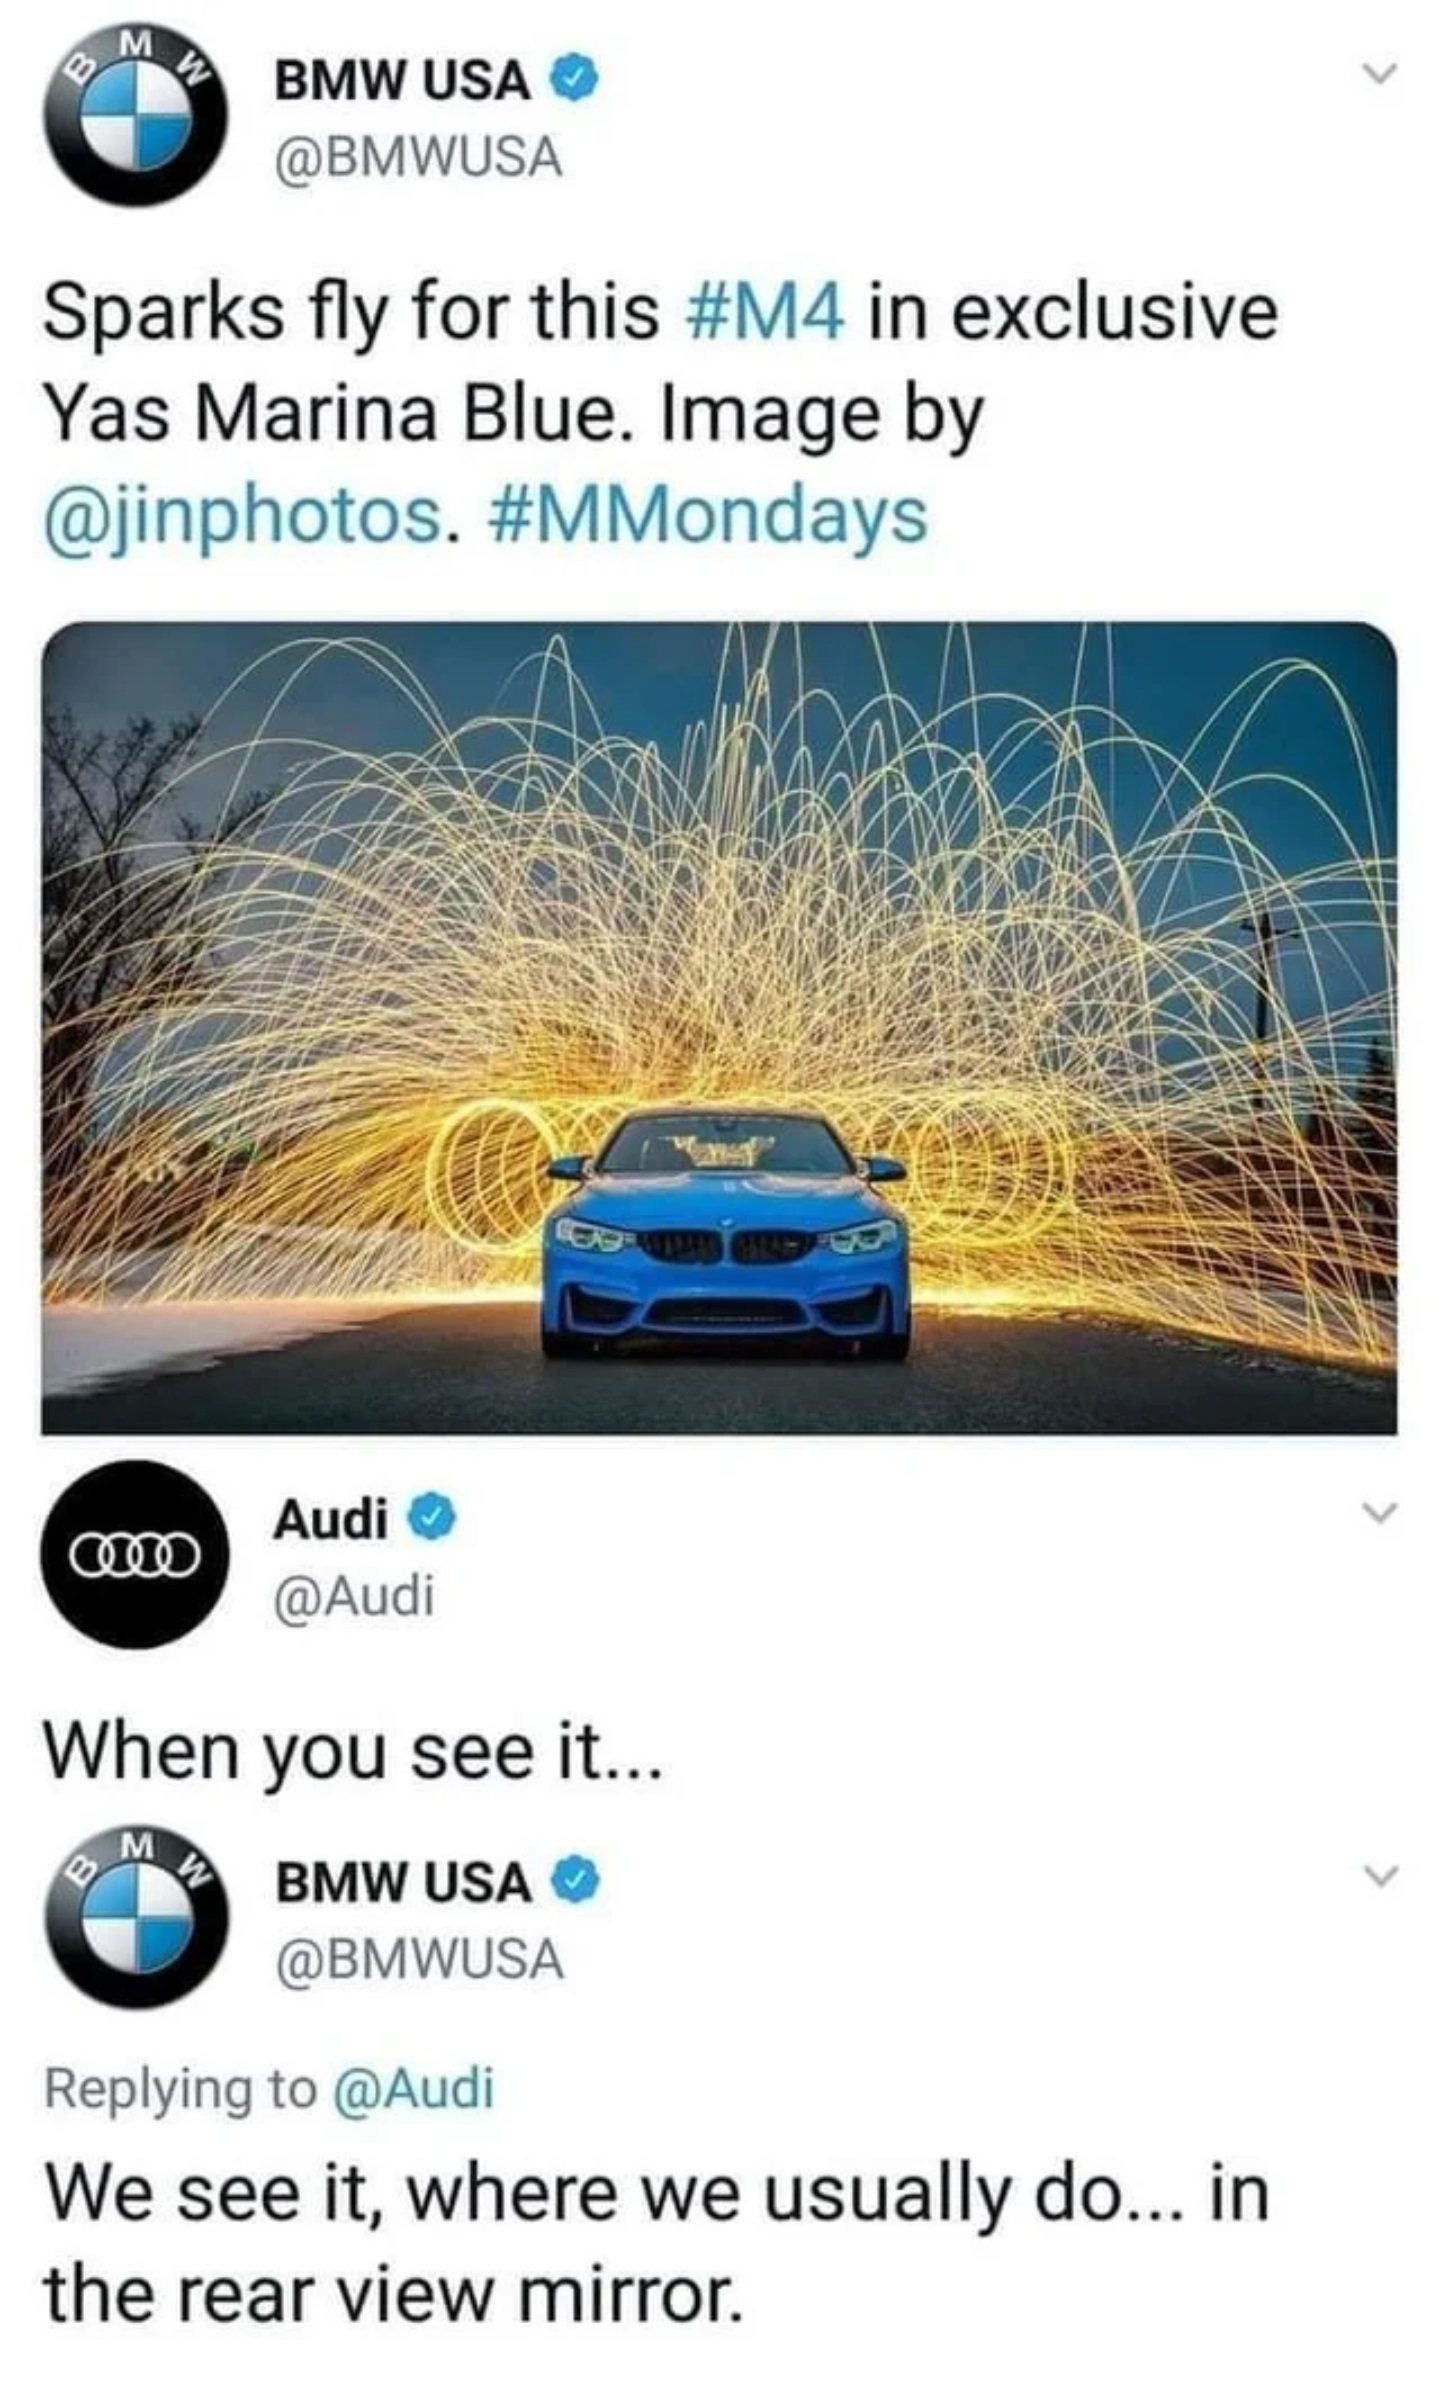 bmw memes - Bmw Usa Sparks fly for this in exclusive Yas Marina Blue. Image by . a Audi When you see it... Bmw Usa We see it, where we usually do... in the rear view mirror.